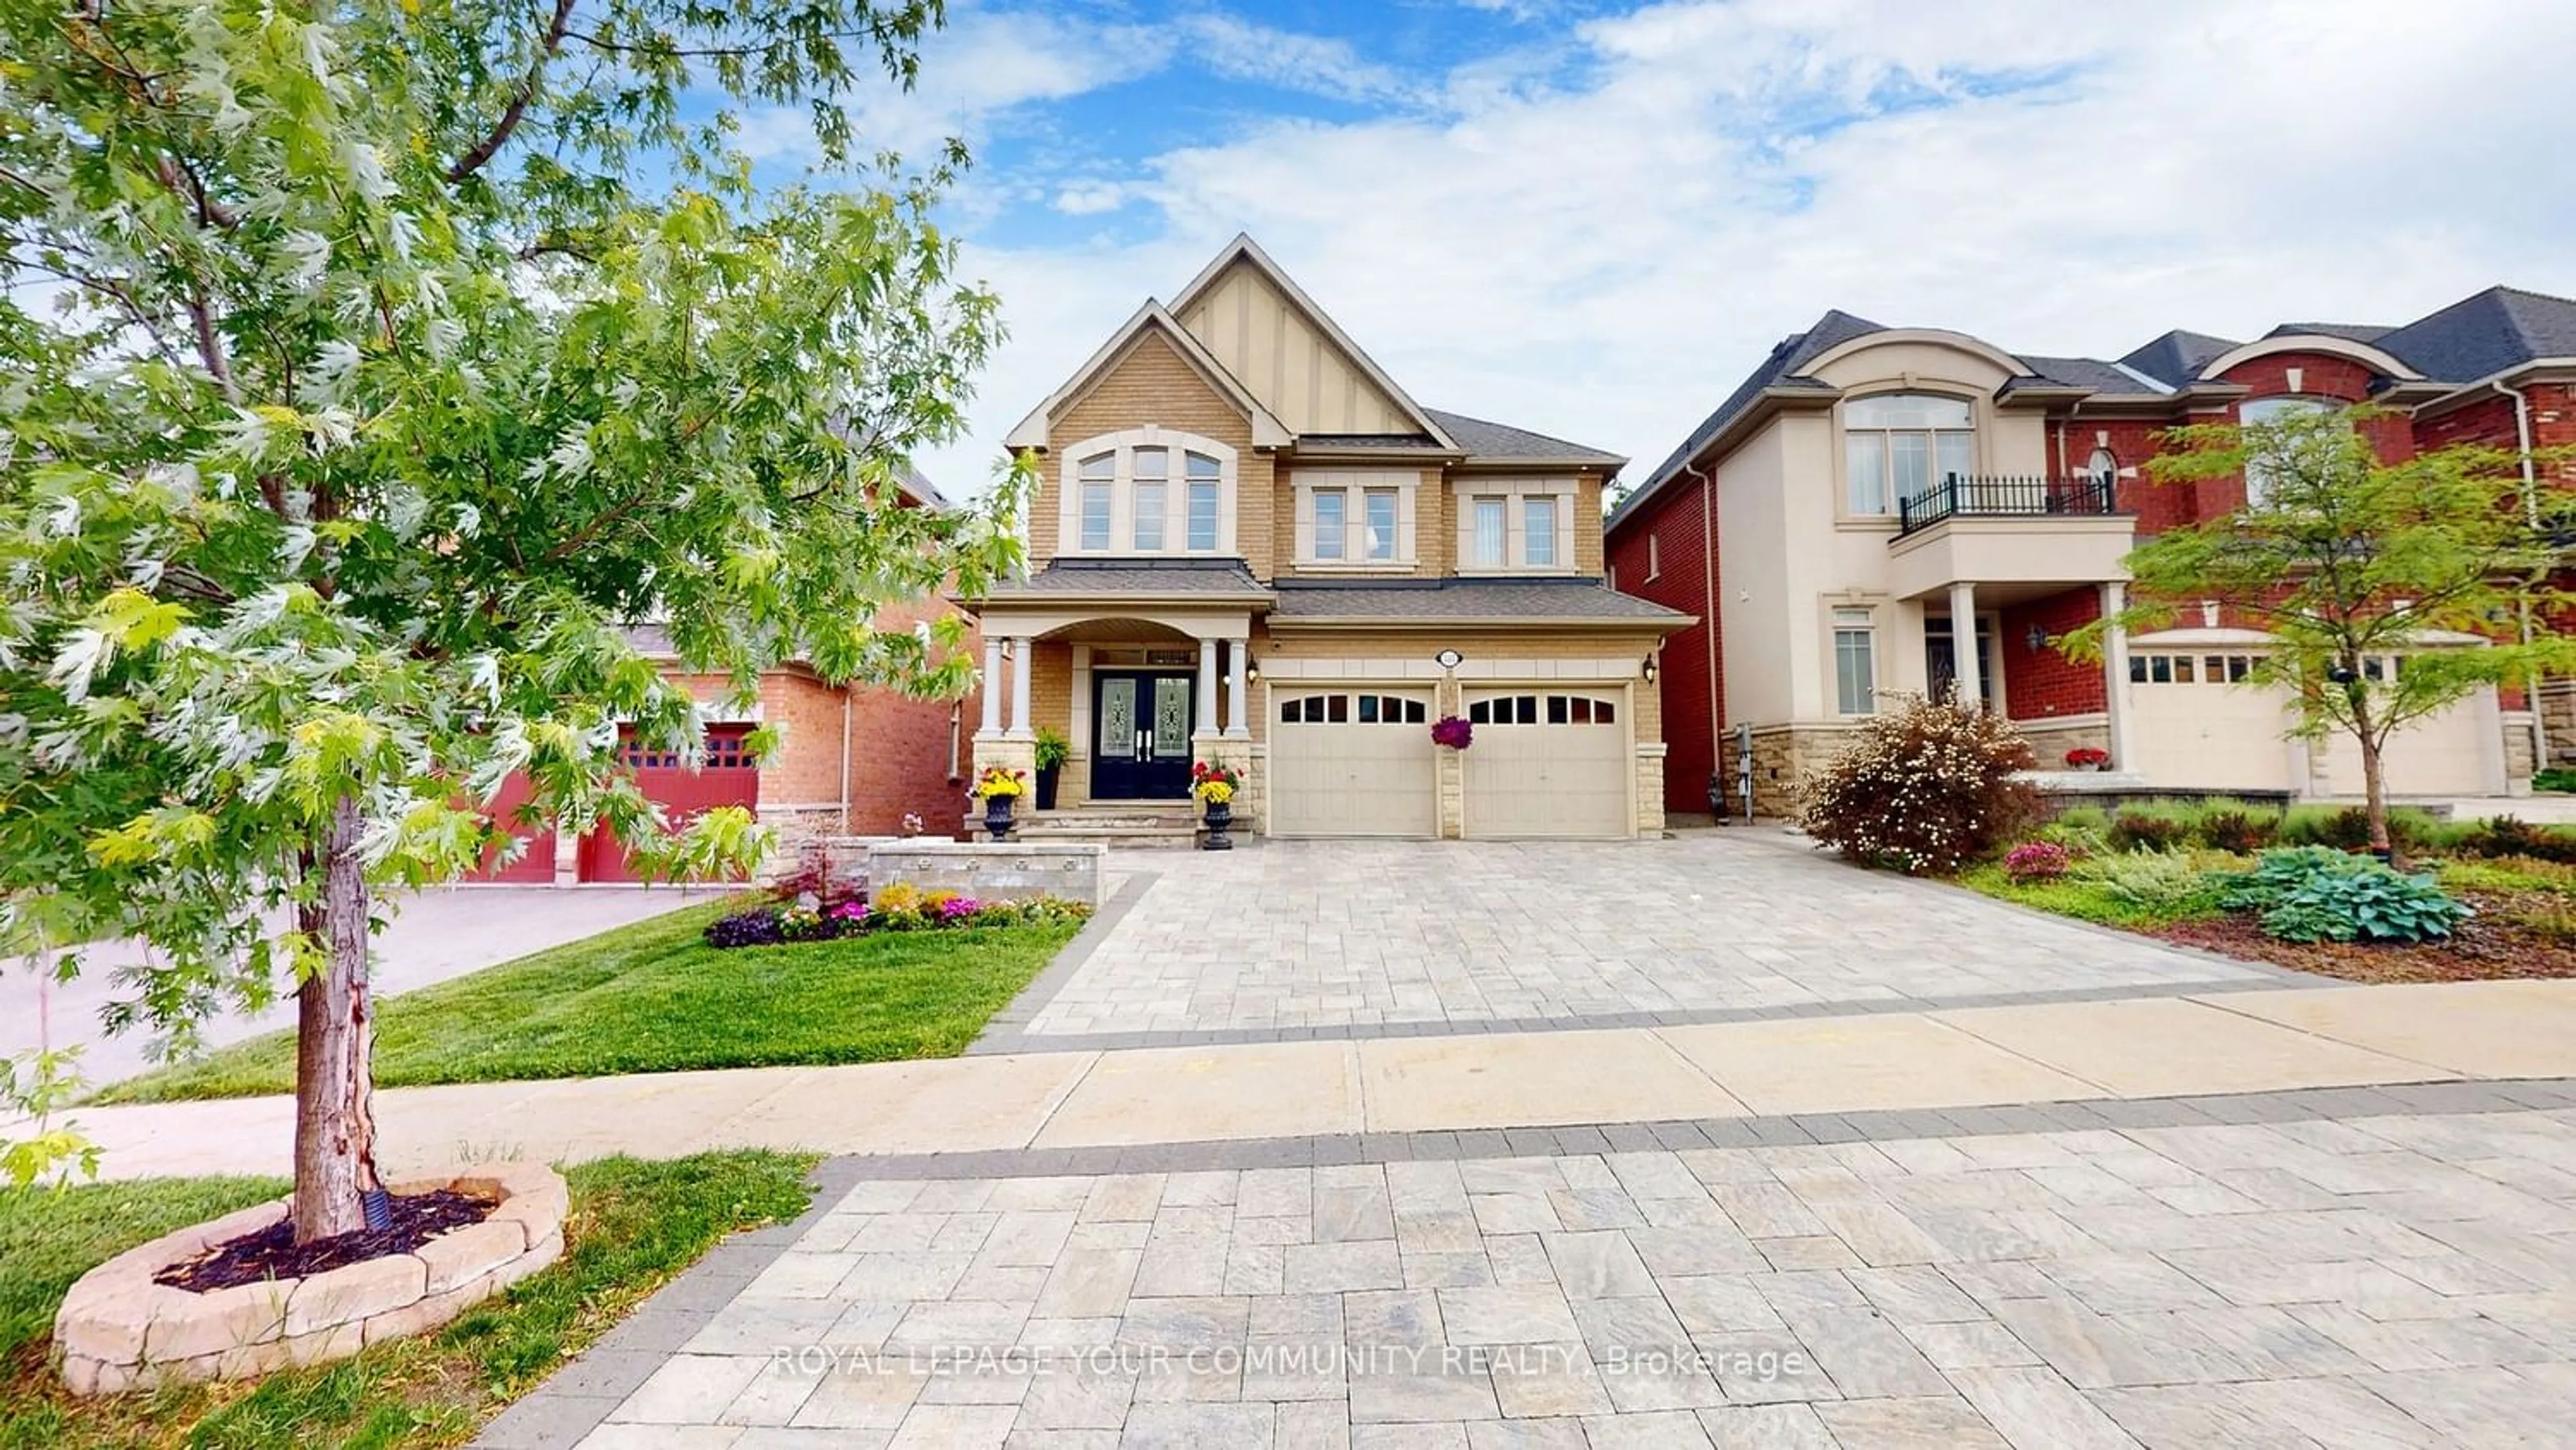 Home with brick exterior material for 543 Valley Vista Dr, Vaughan Ontario L6A 3V4